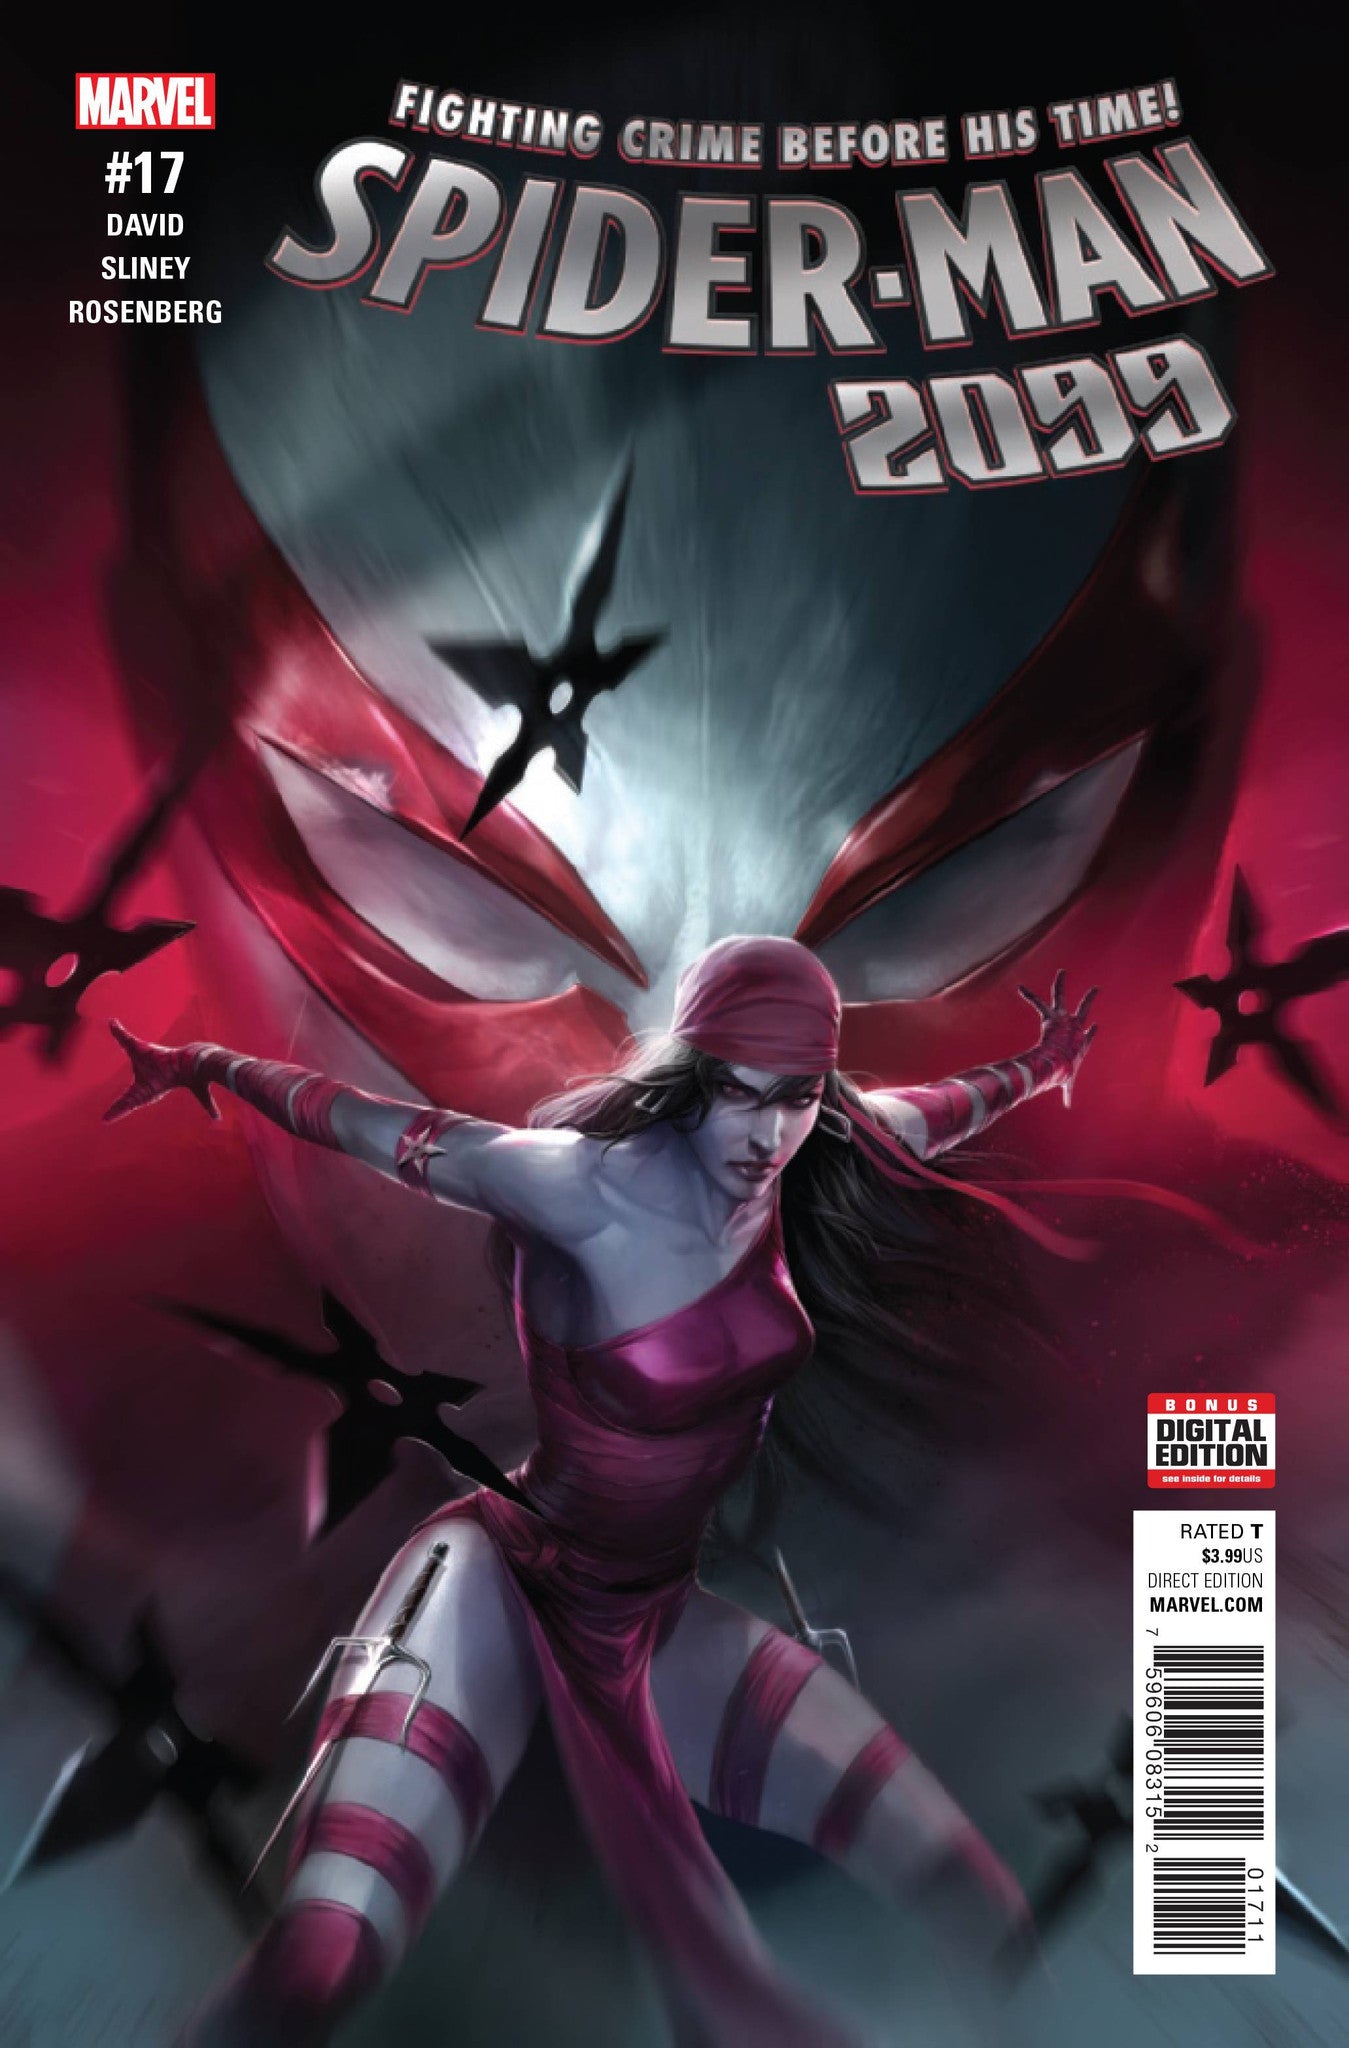 SPIDER-MAN 2099 #17 COVER